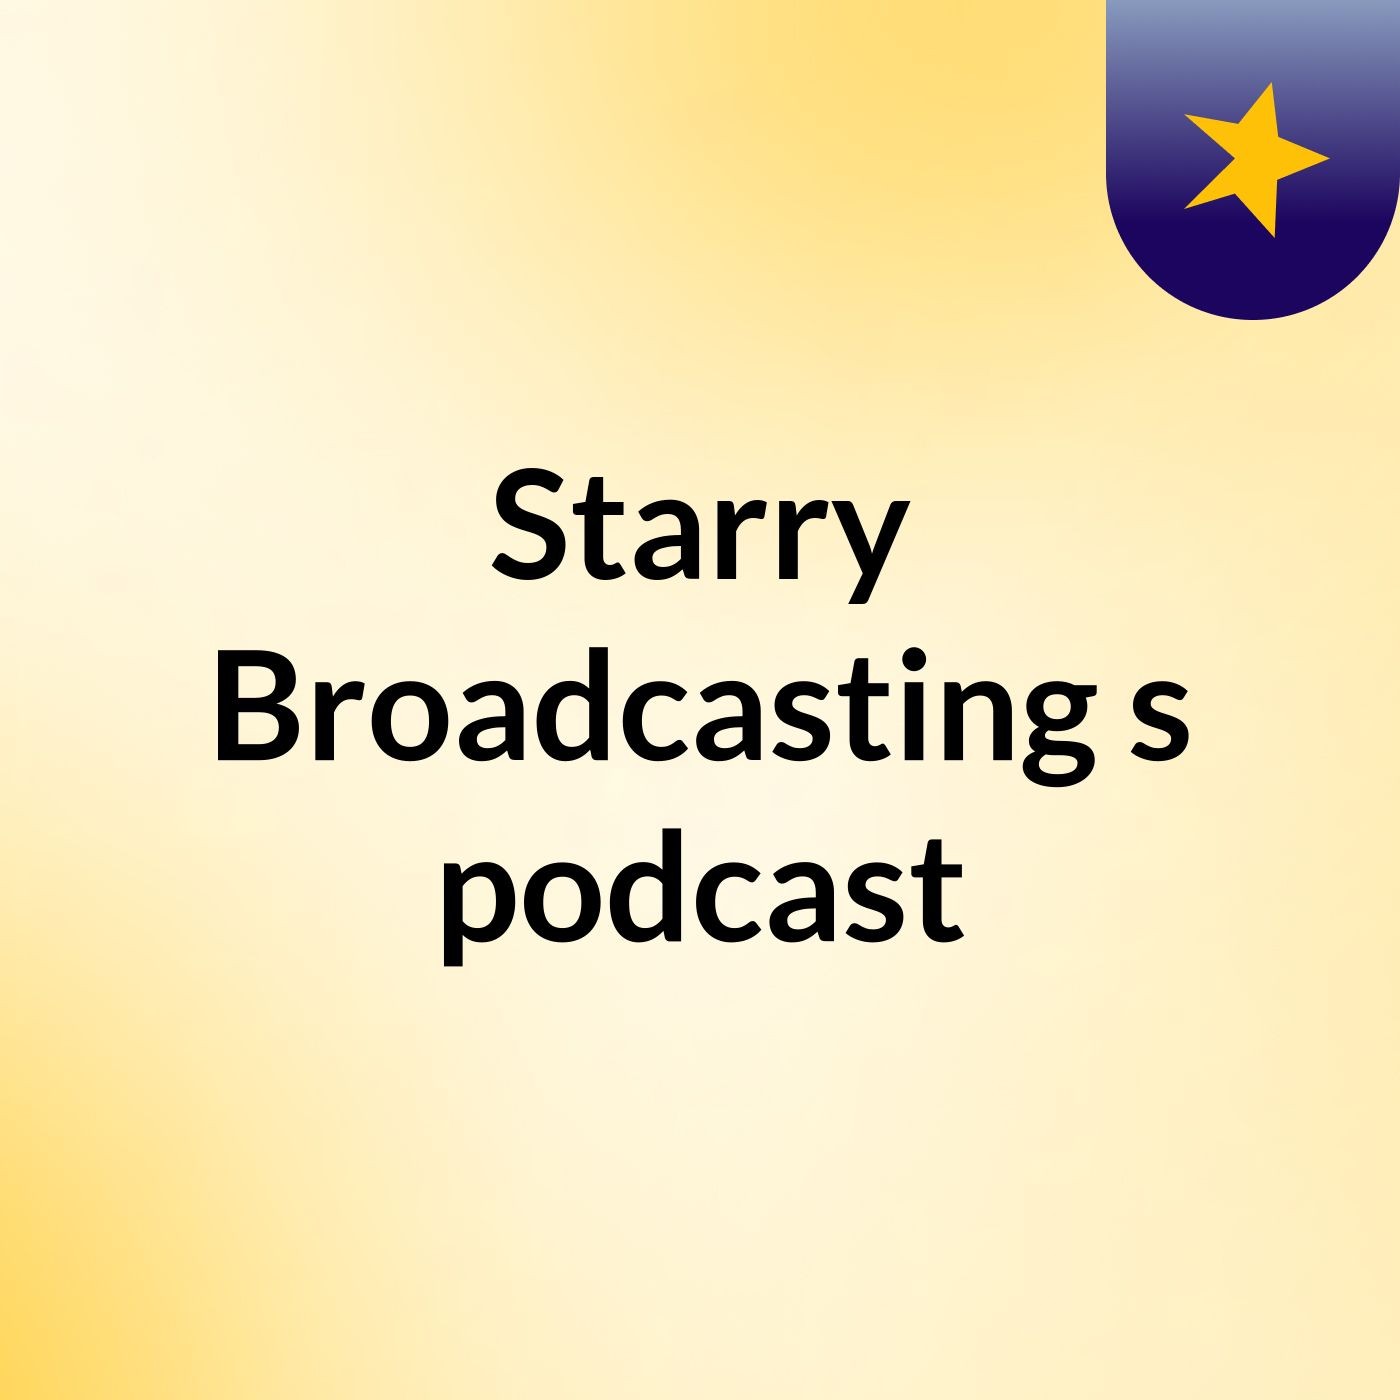 Episode 4 - Starry Broadcasting's podcast